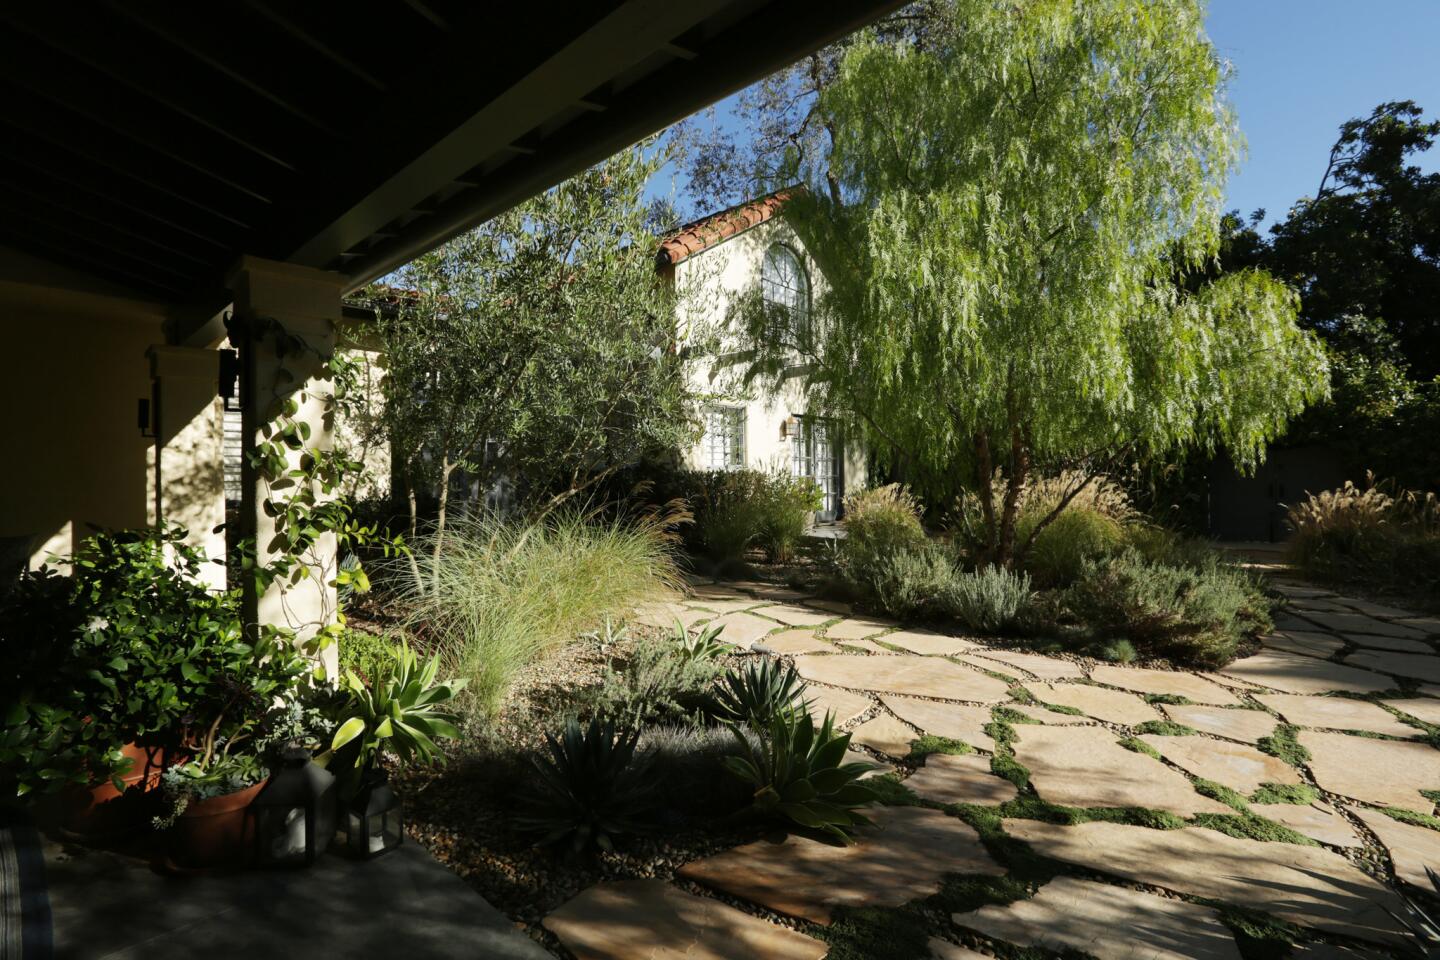 A pepper tree breaks up the yard and creates privacy between the main house and the guest house.